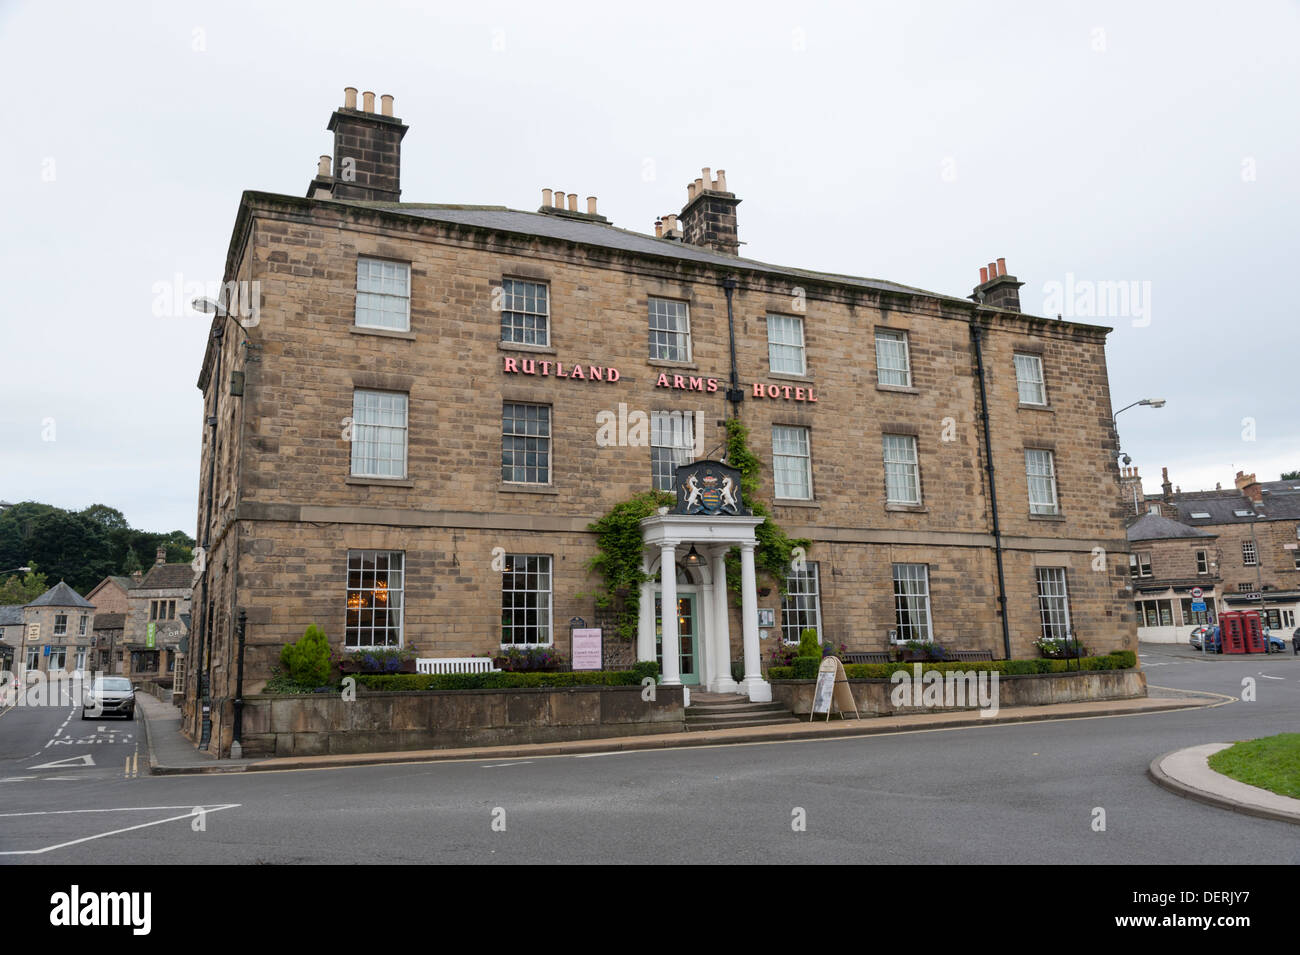 The Rutland Arms Hotel Bakewell Derbyshire Peak District UK Stock Photo